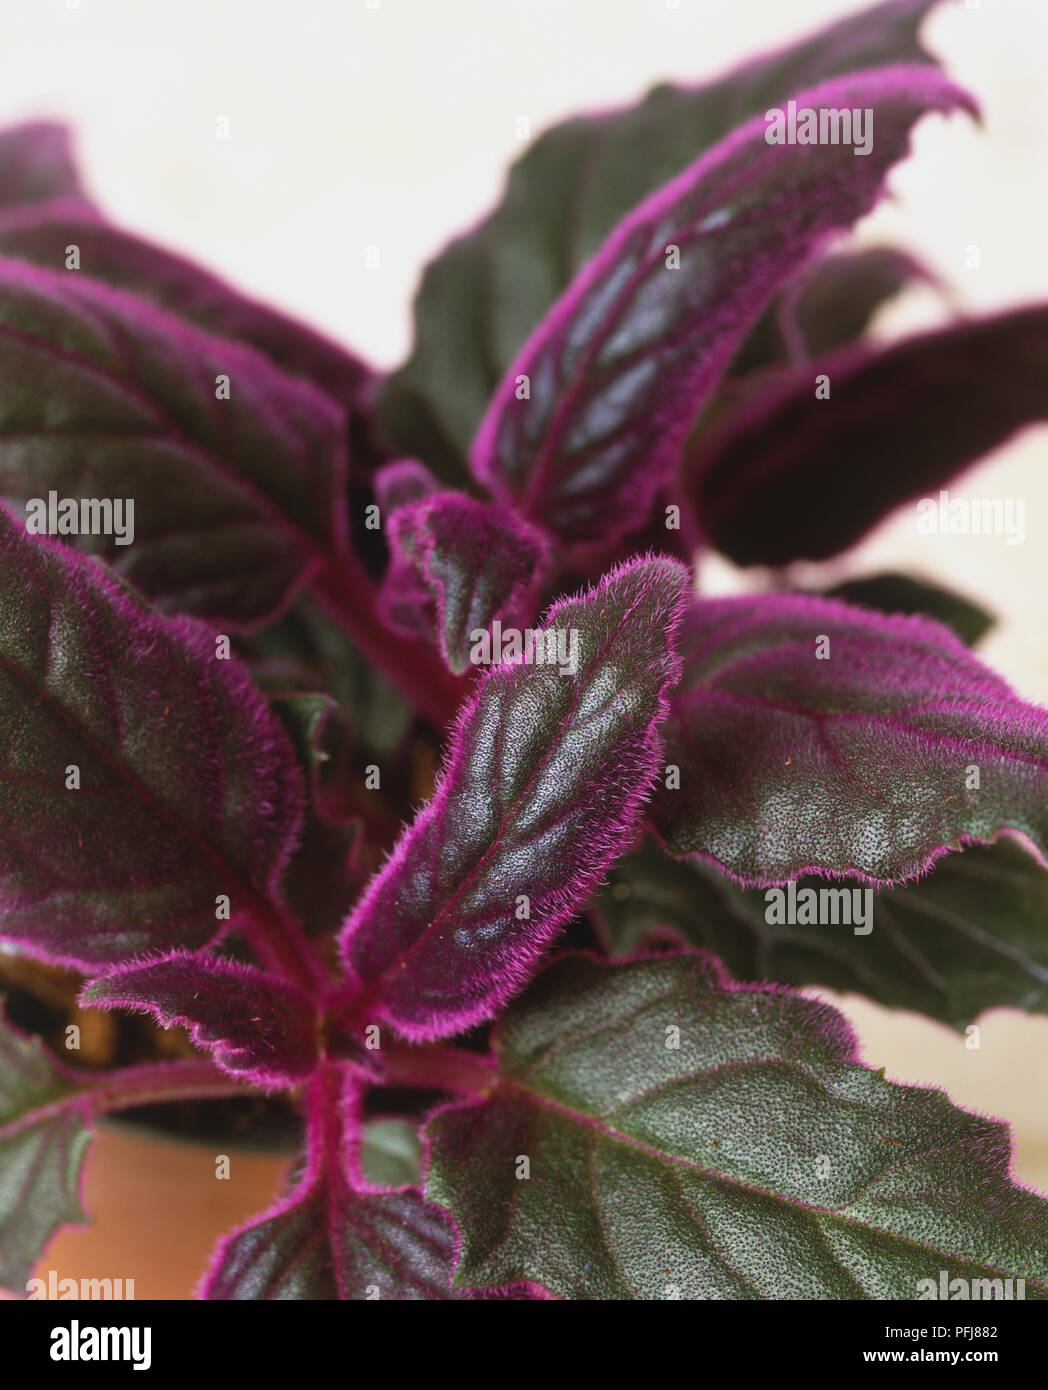 Gynura Aurantiaca Purple Velvet Plant Toothed And Curled Leaves With